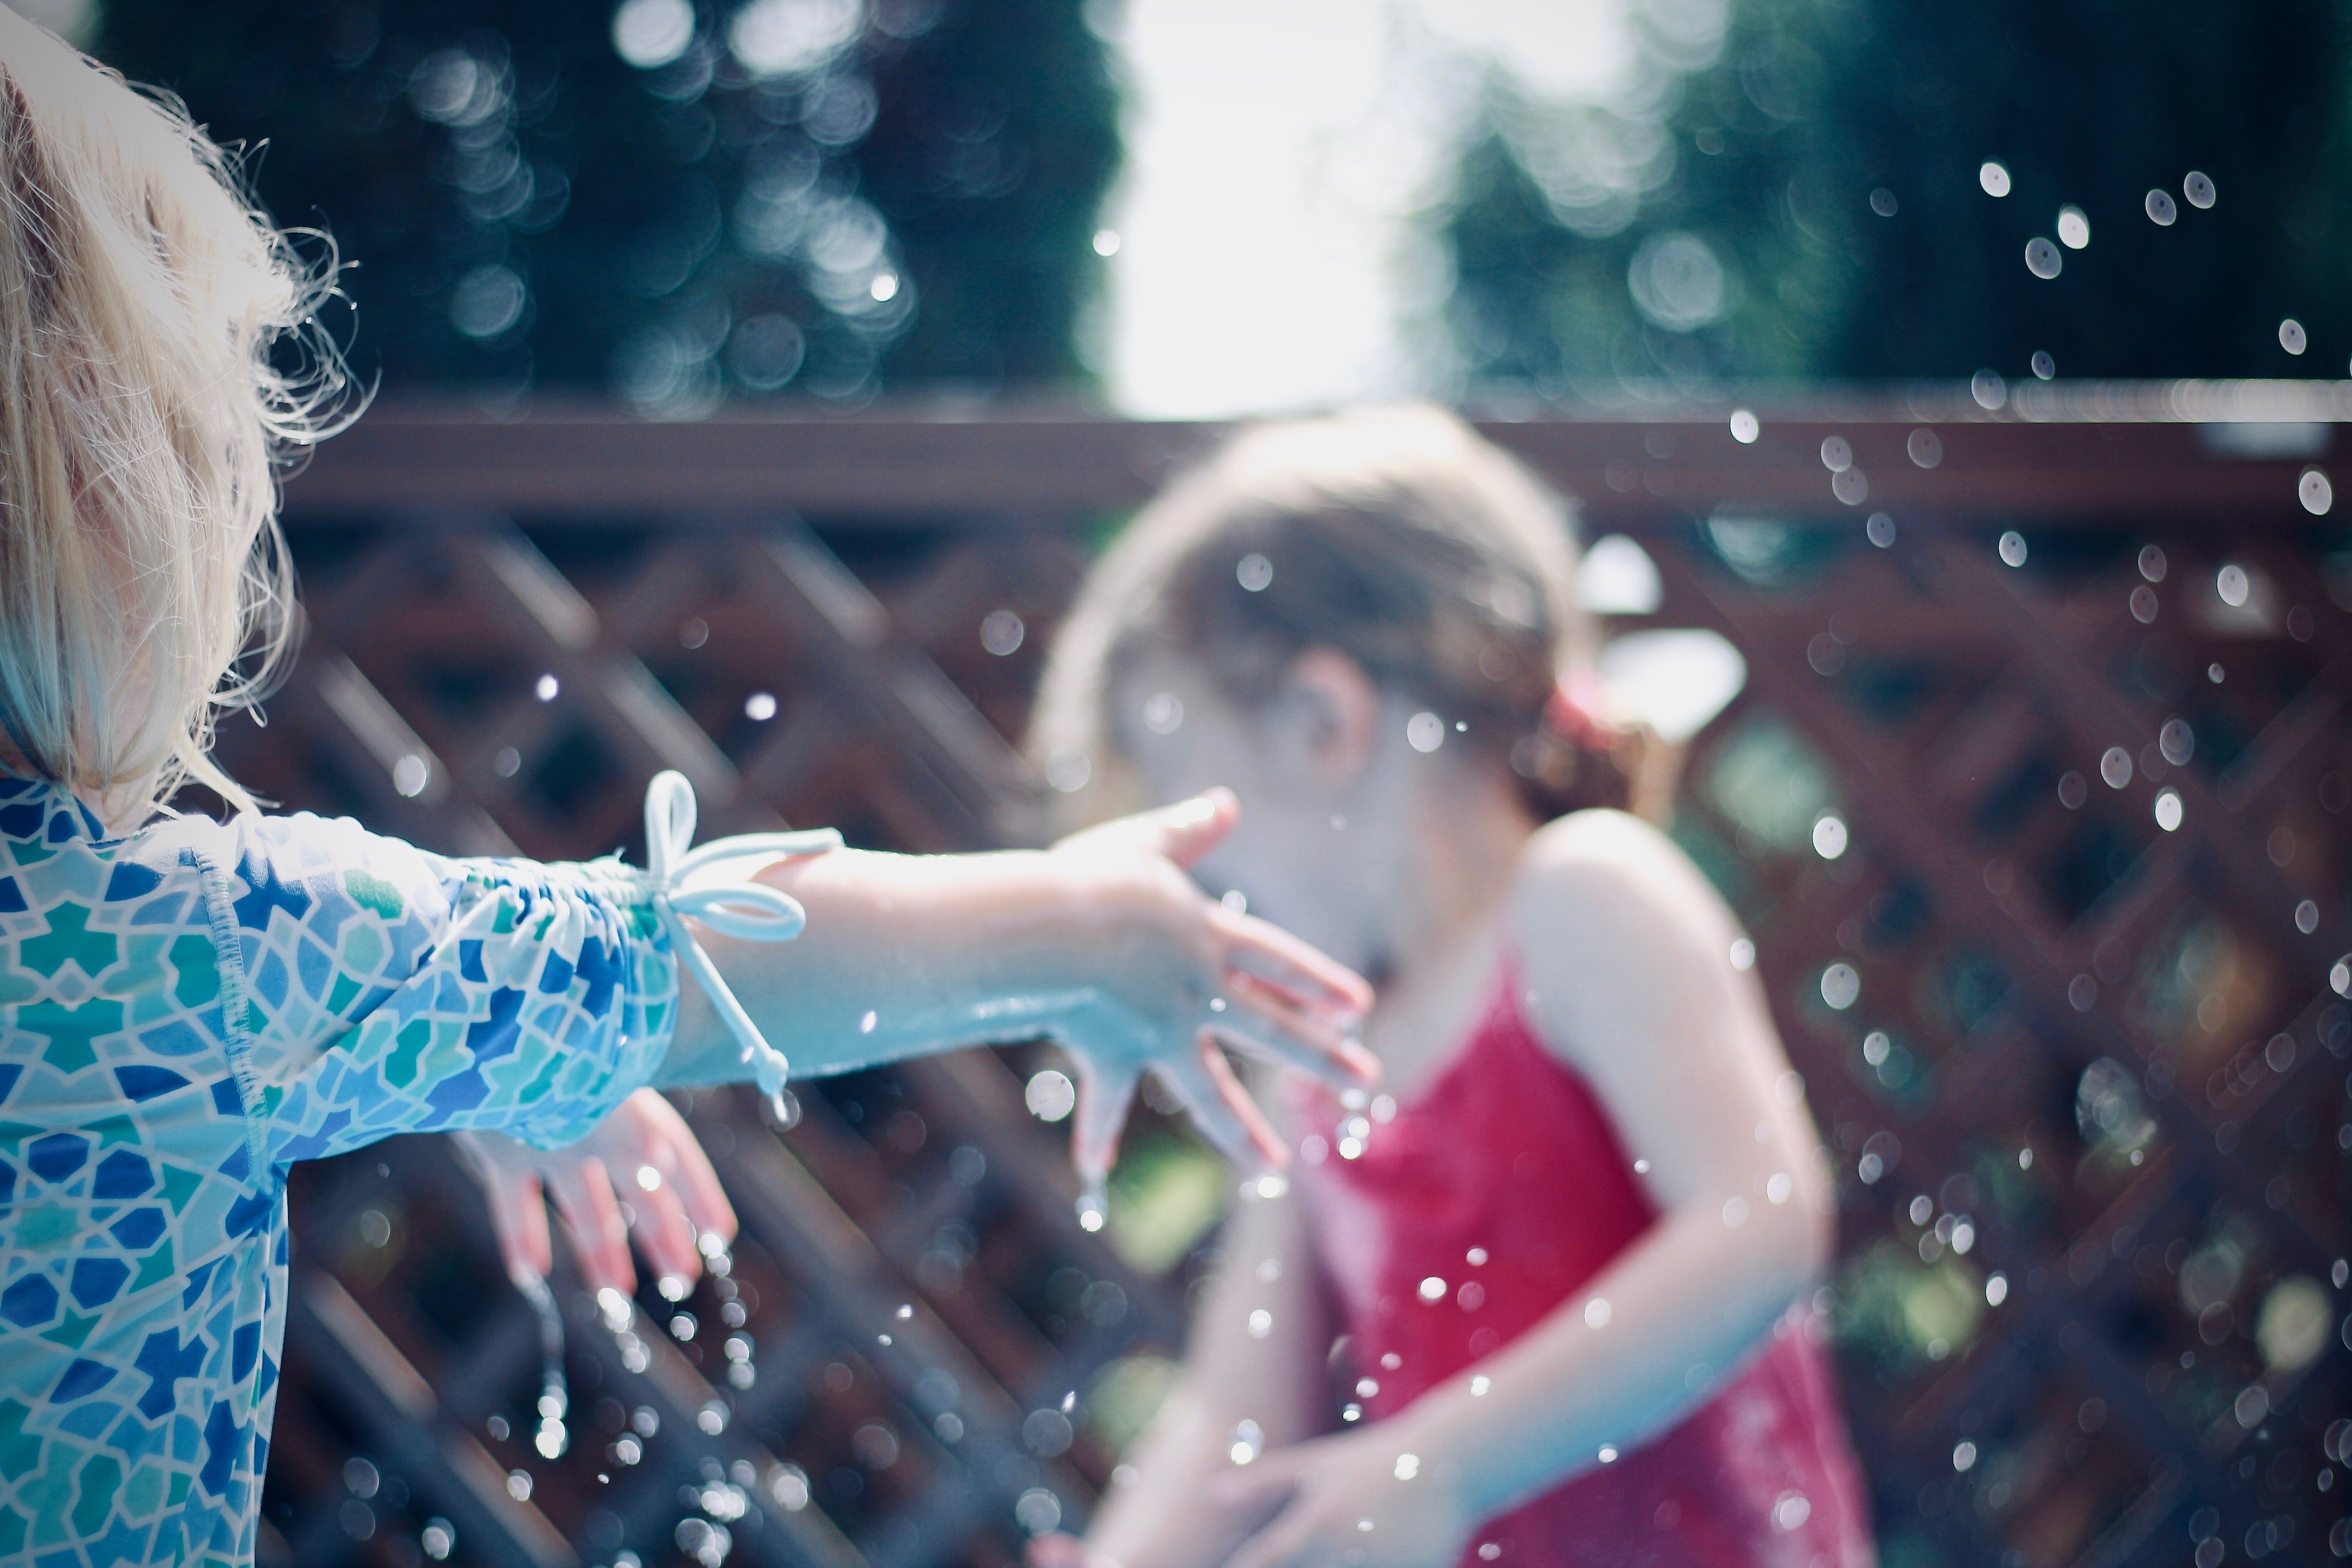 Alice loved playing with the other children at the pool. | Source: Unsplash